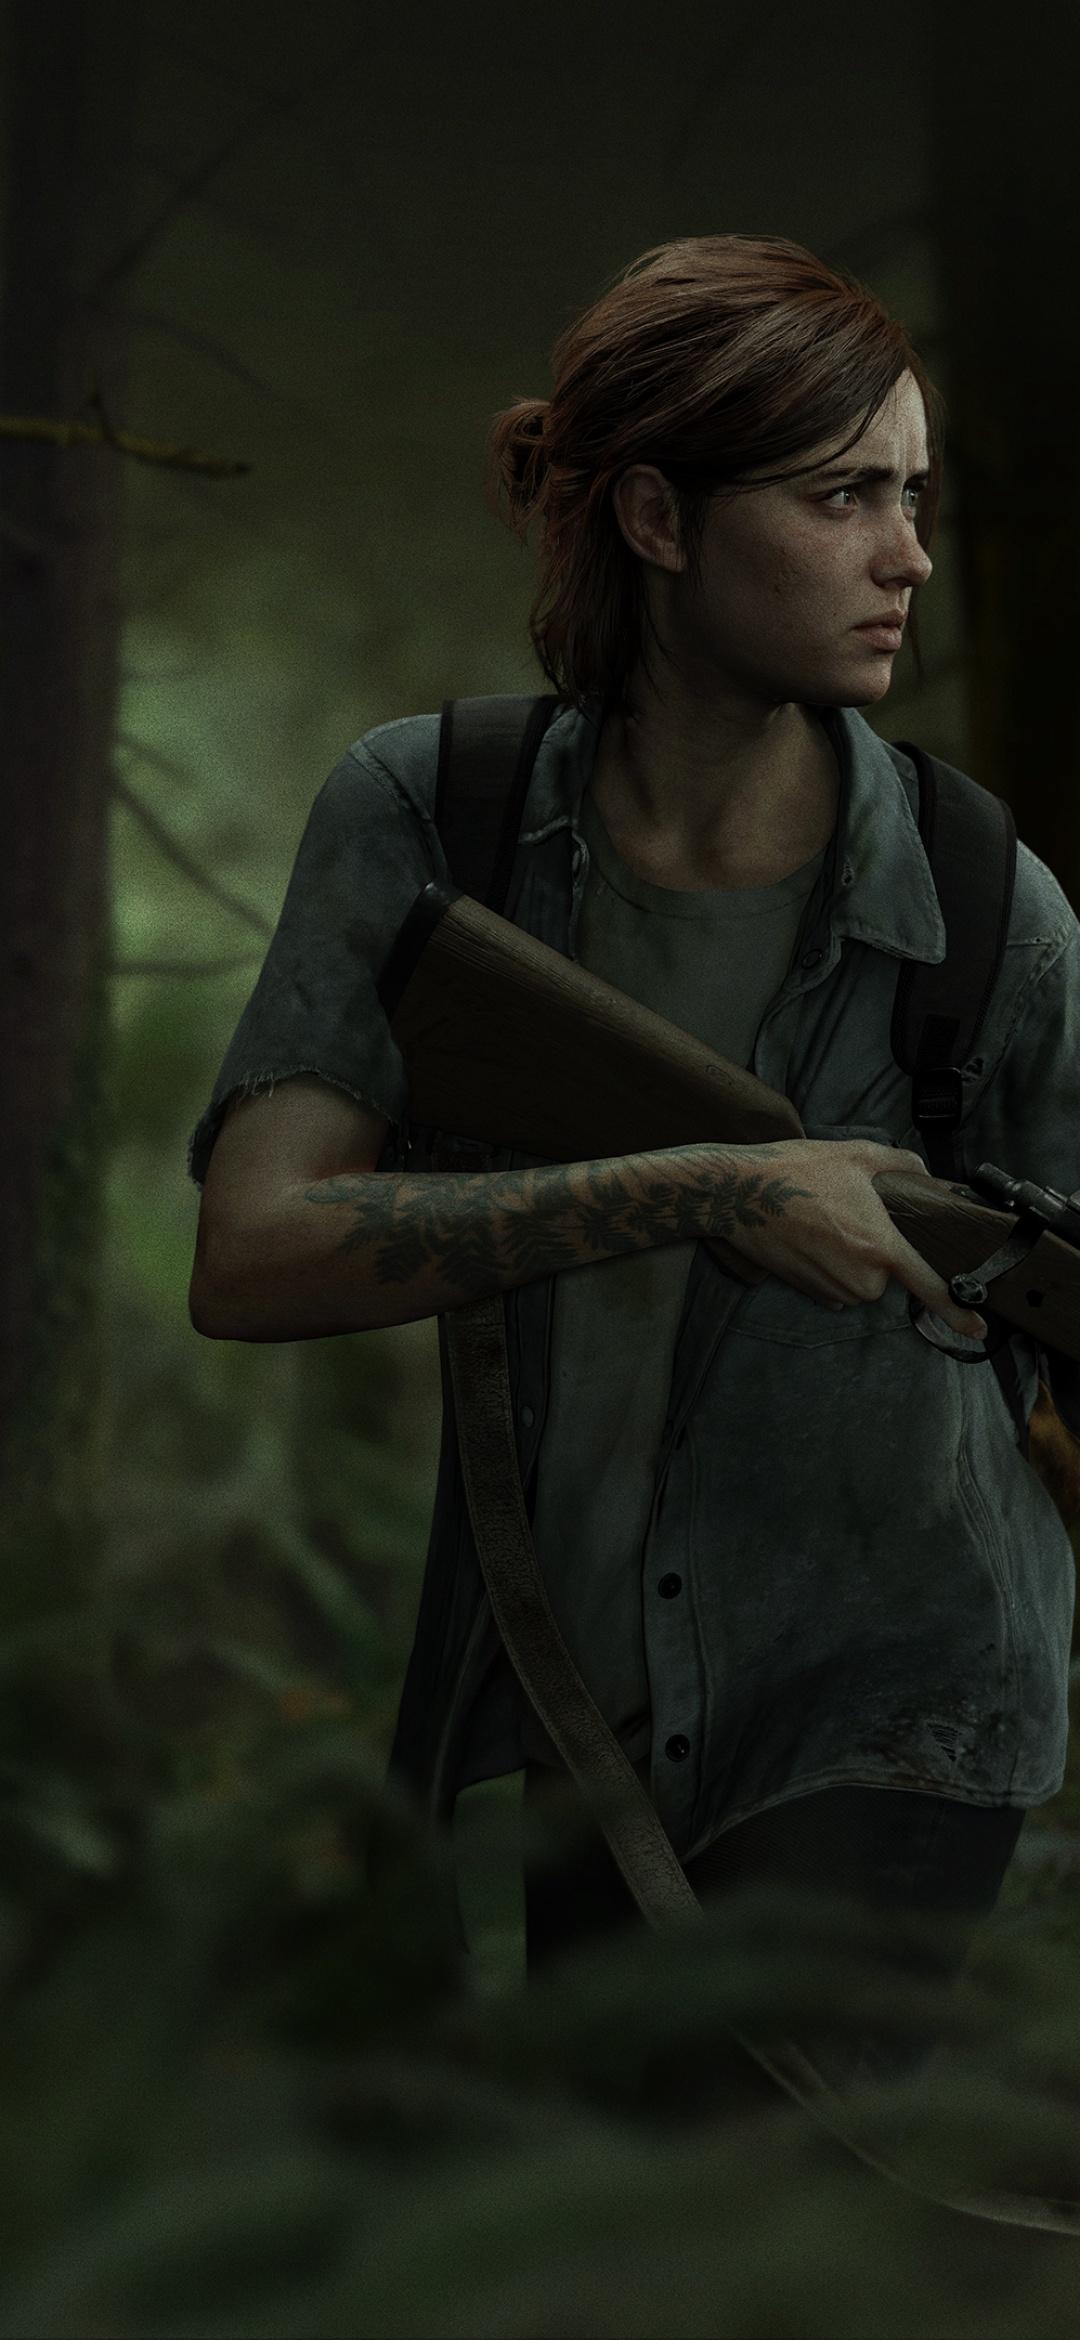 The Last of Us 2 4k Wallpapers - Top Free The Last of Us 2 4k